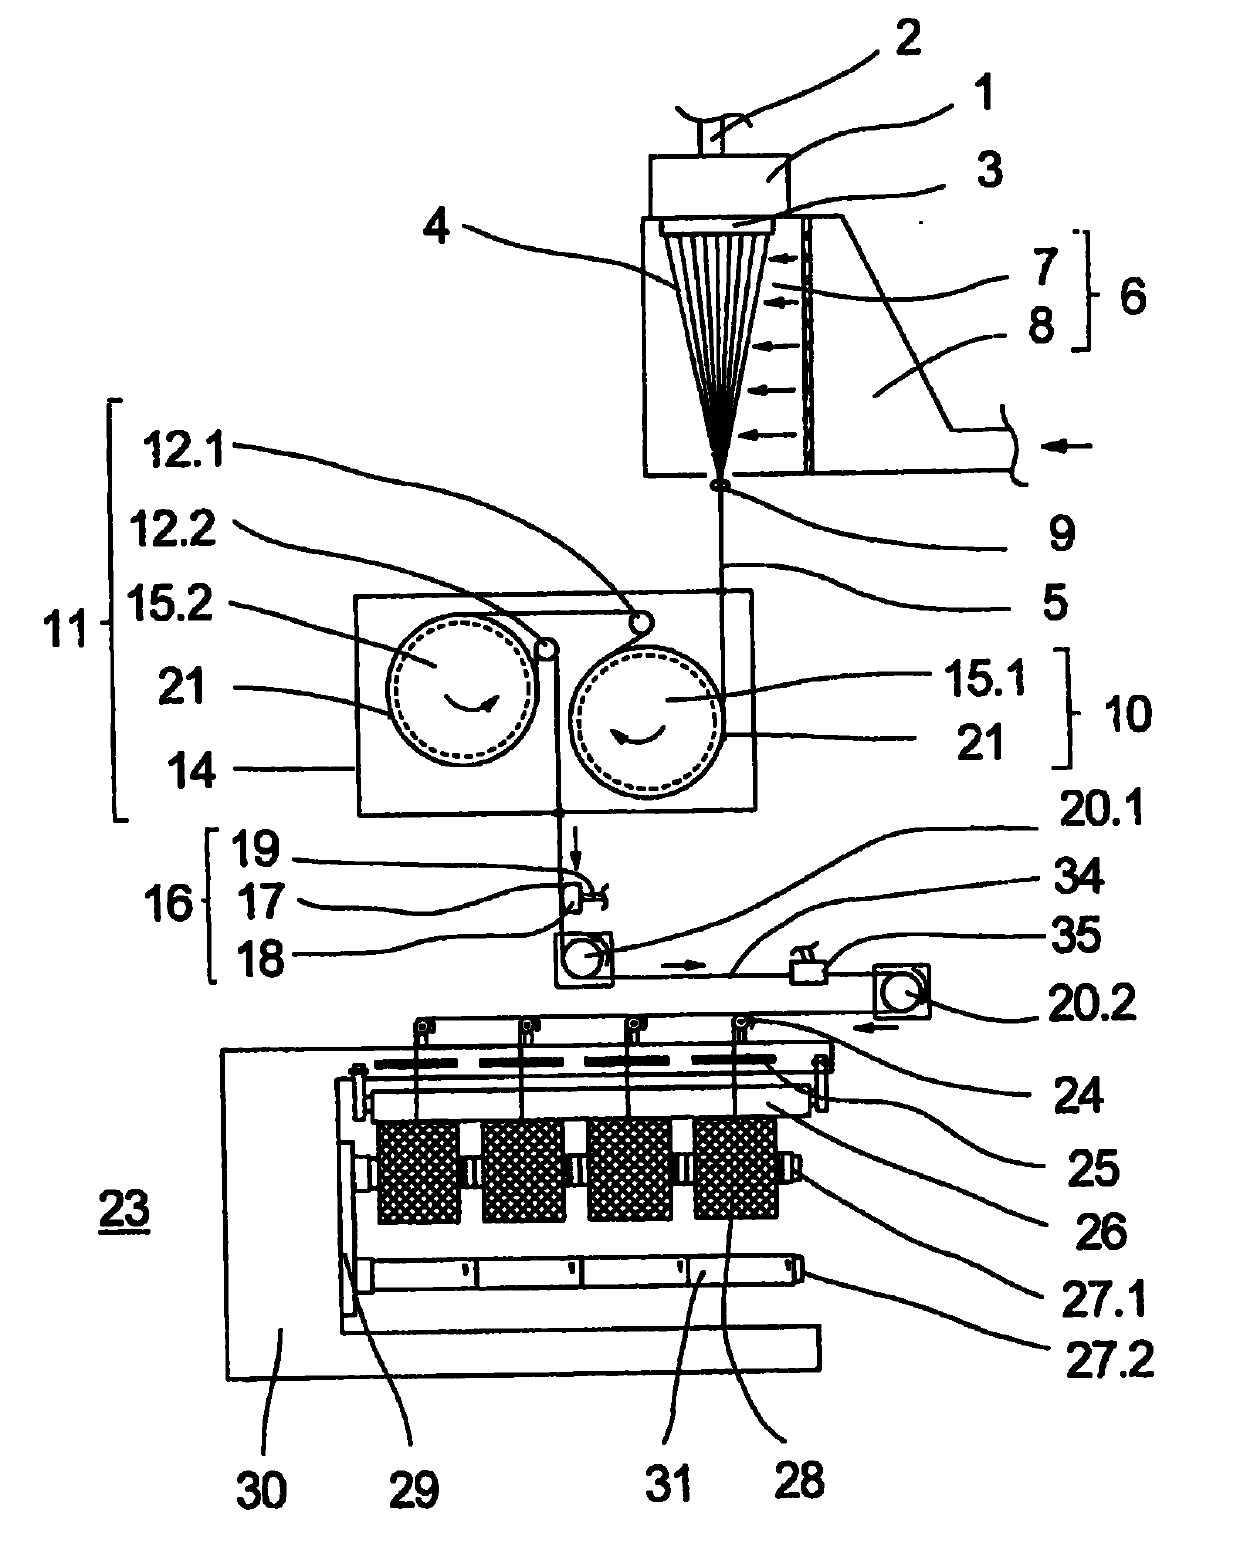 Method for melt-spinning, drawing, and winding up a multifilament, and apparatus for carrying out said method